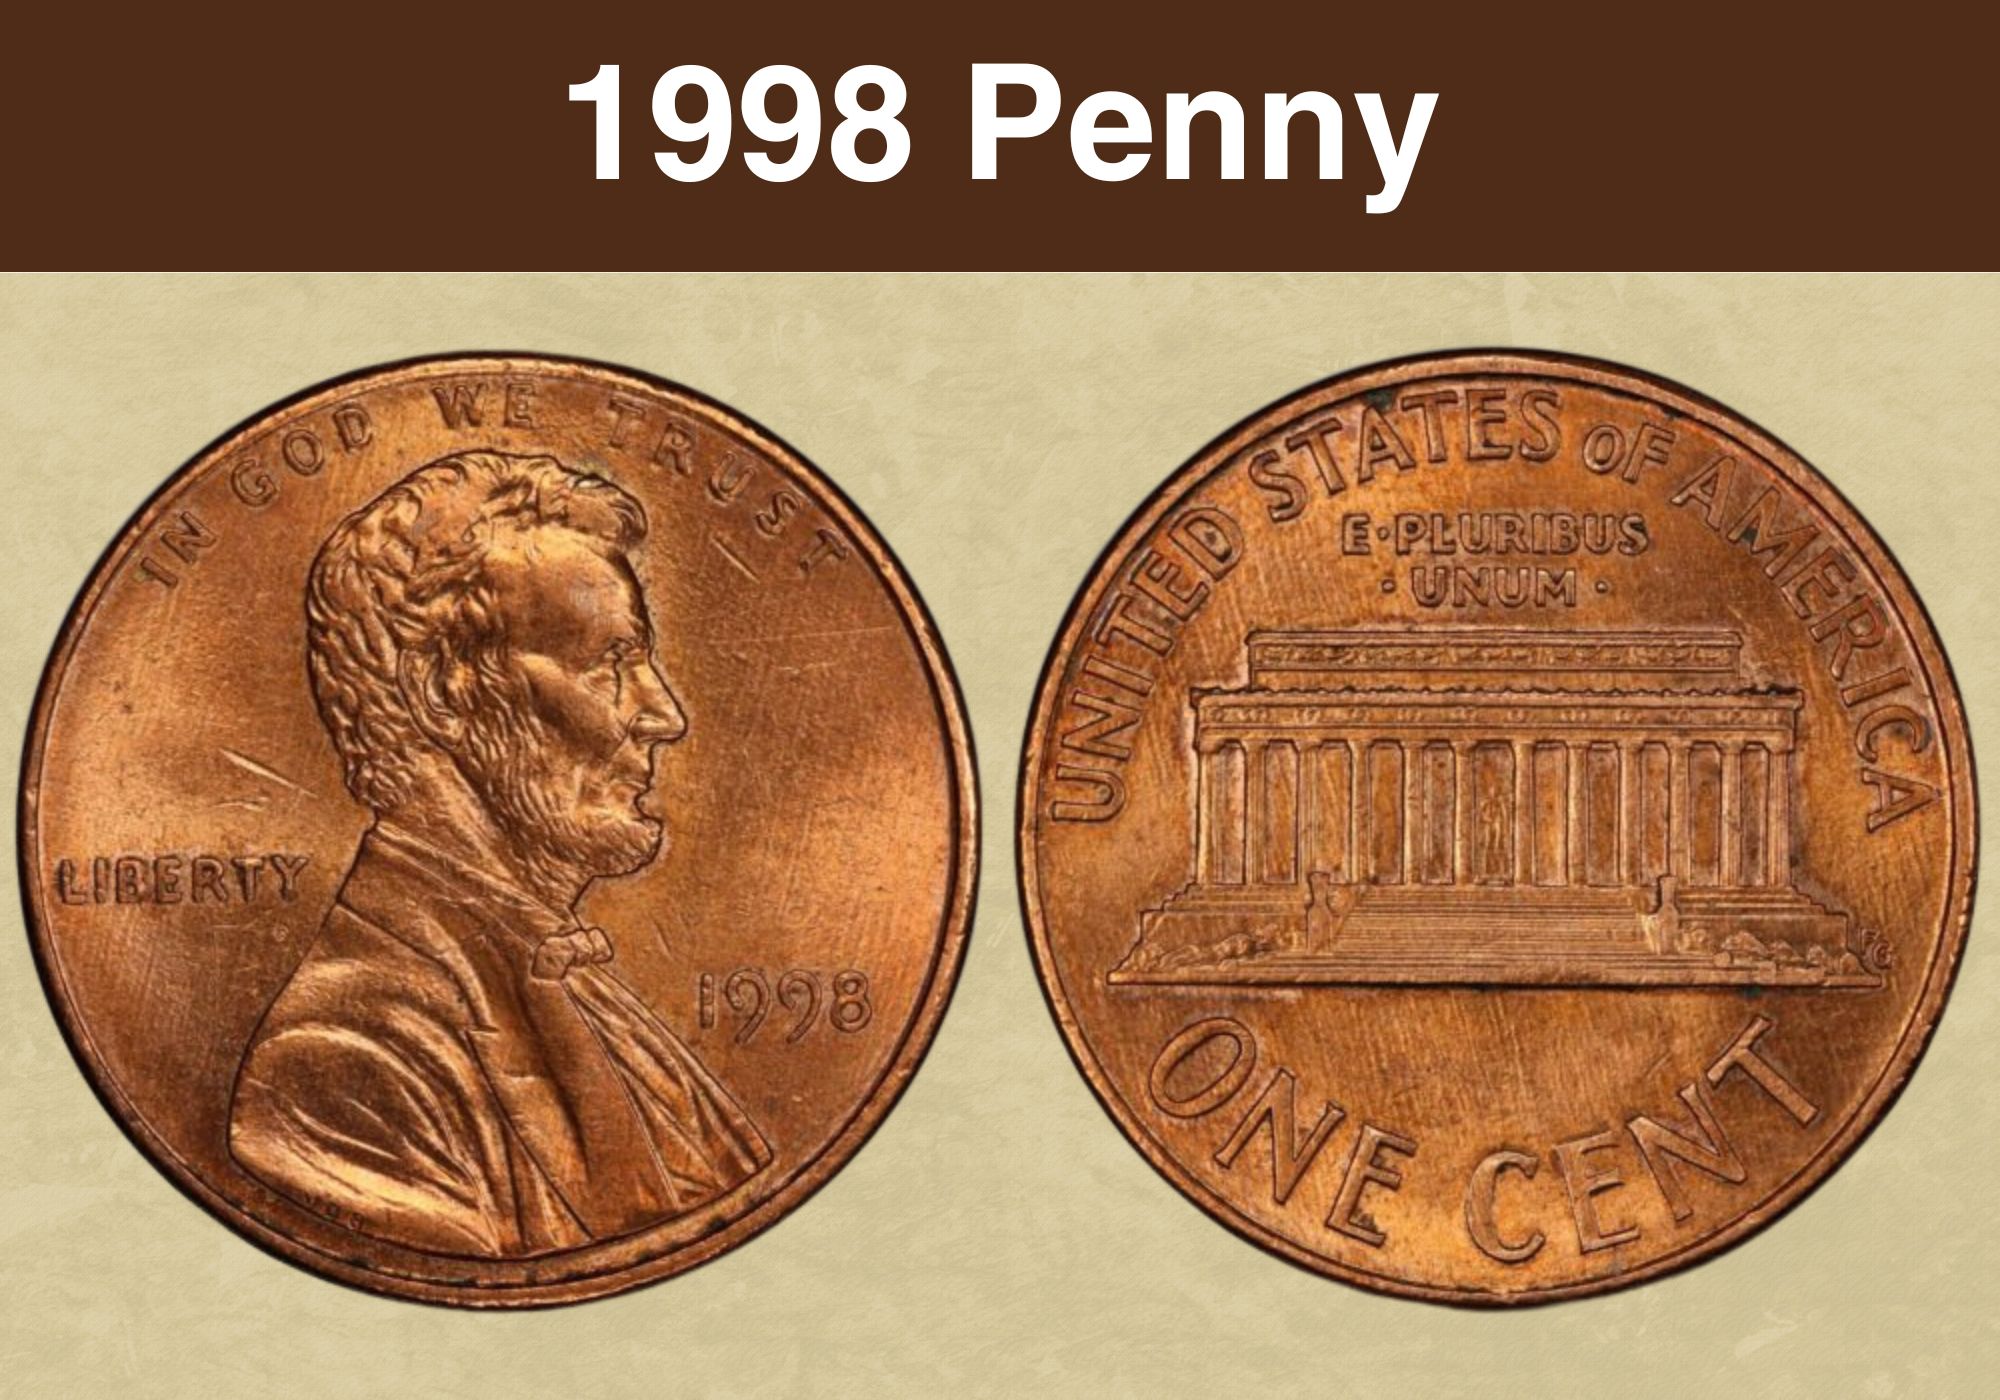 1998 Penny Value